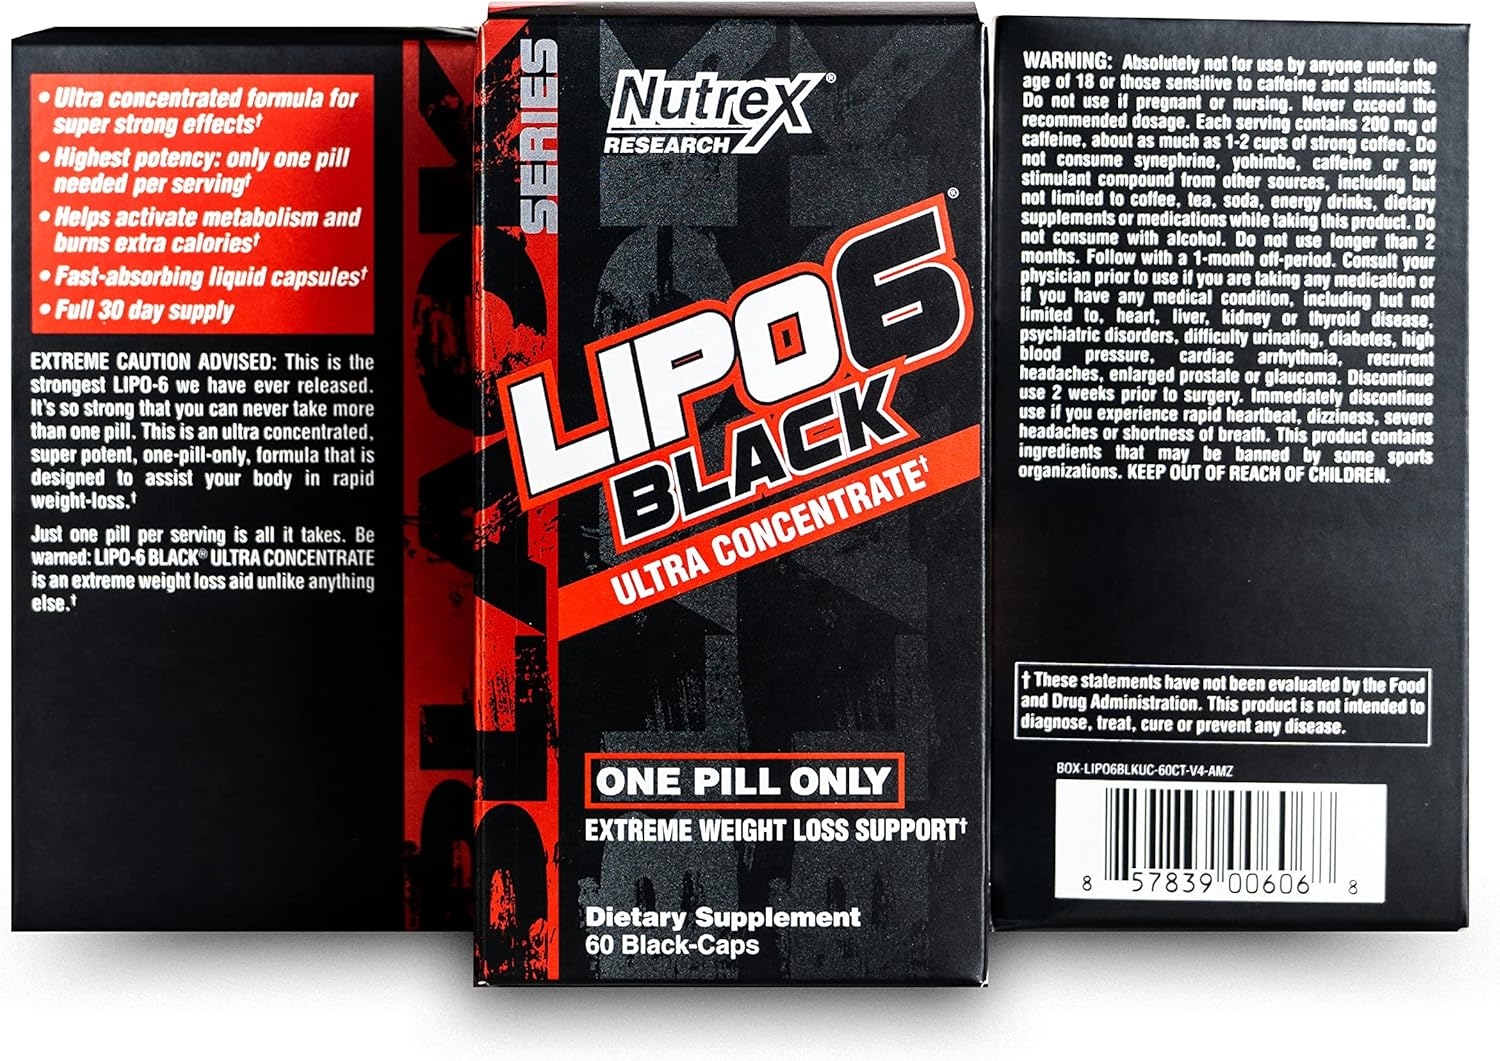 Nutrex Research Lipo-6 Black Ultra Concentrate | Thermogenic Energizing Fat Burner Supplement, Increase Weight Loss, Energy & Intense Focus | 60Count